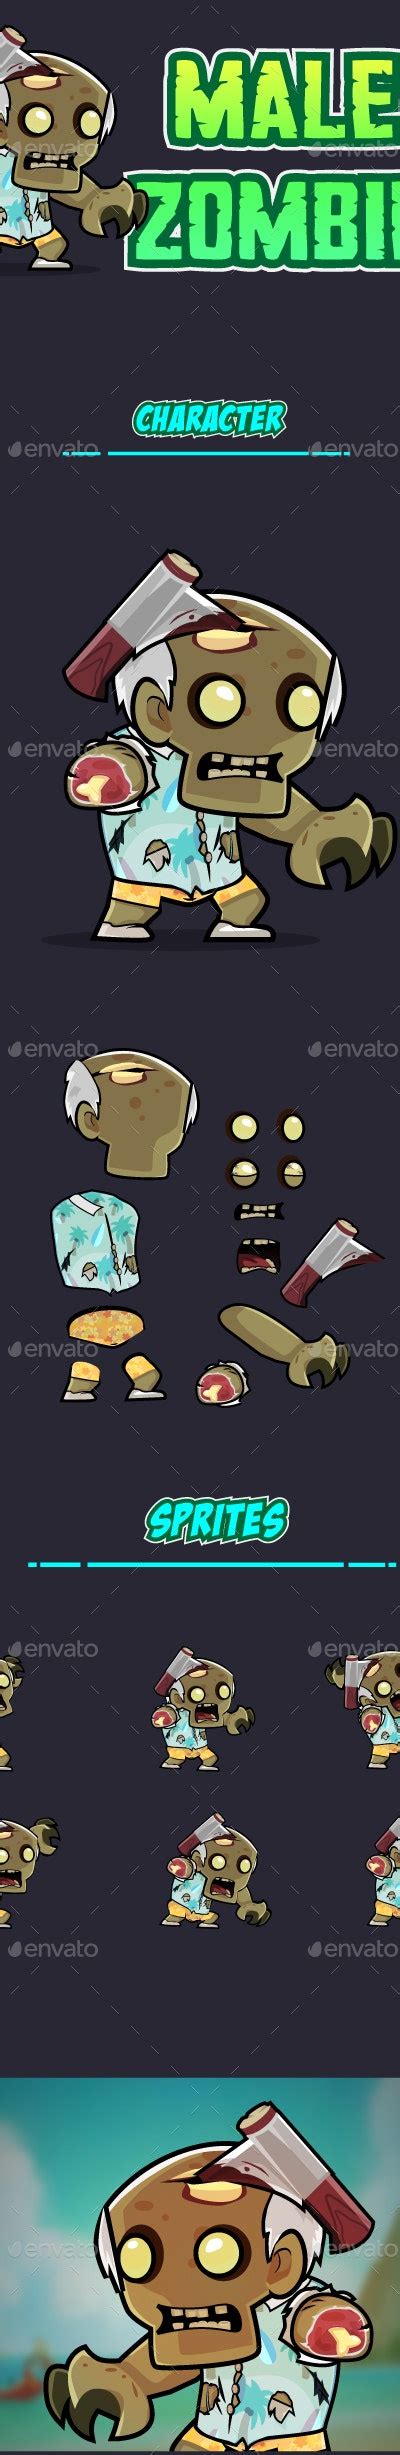 Male Zombie 2d Game Character Sprites 03 Game Assets Graphicriver